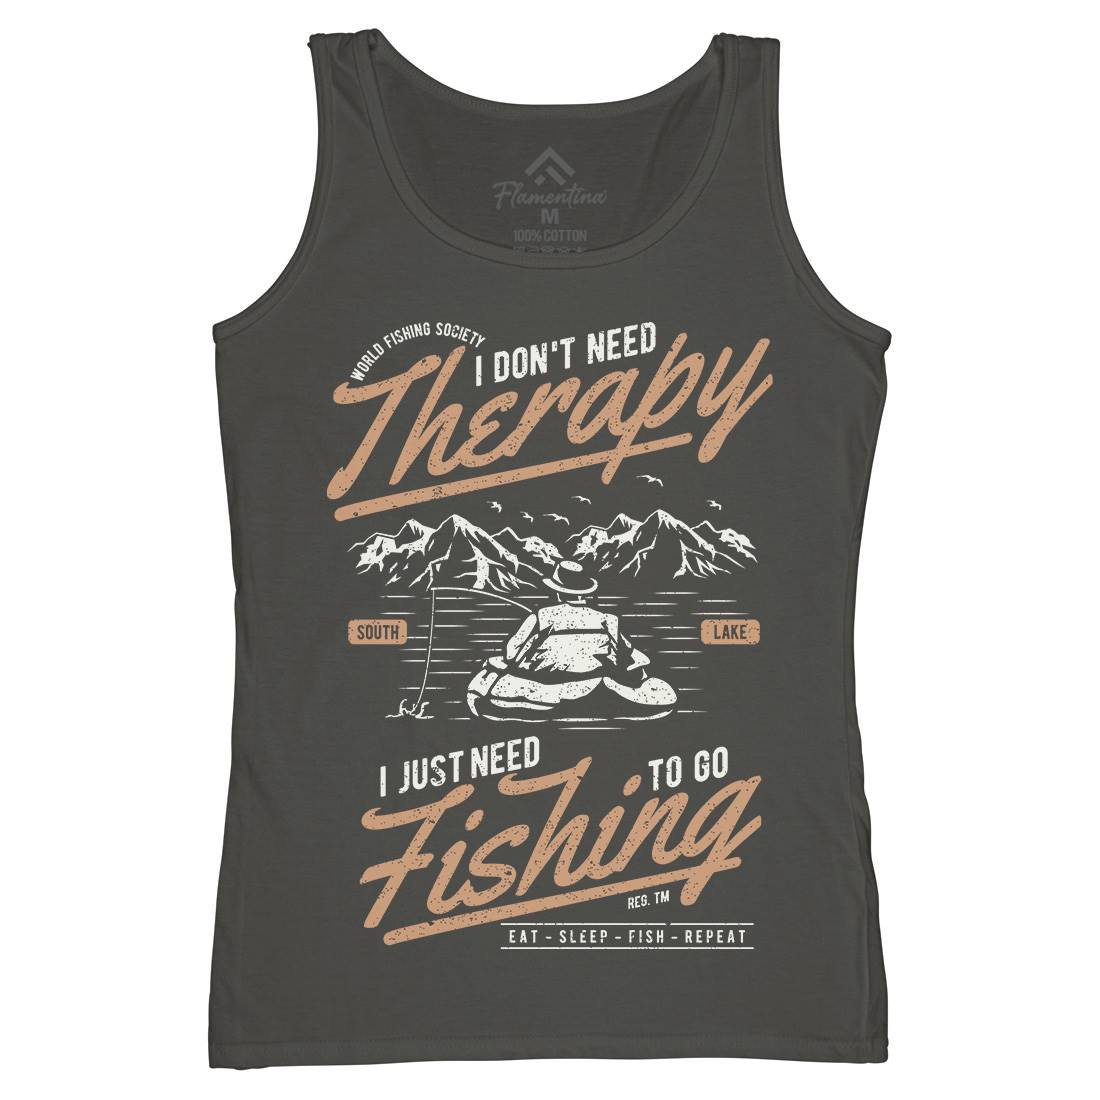 Therapy Womens Organic Tank Top Vest Fishing A662